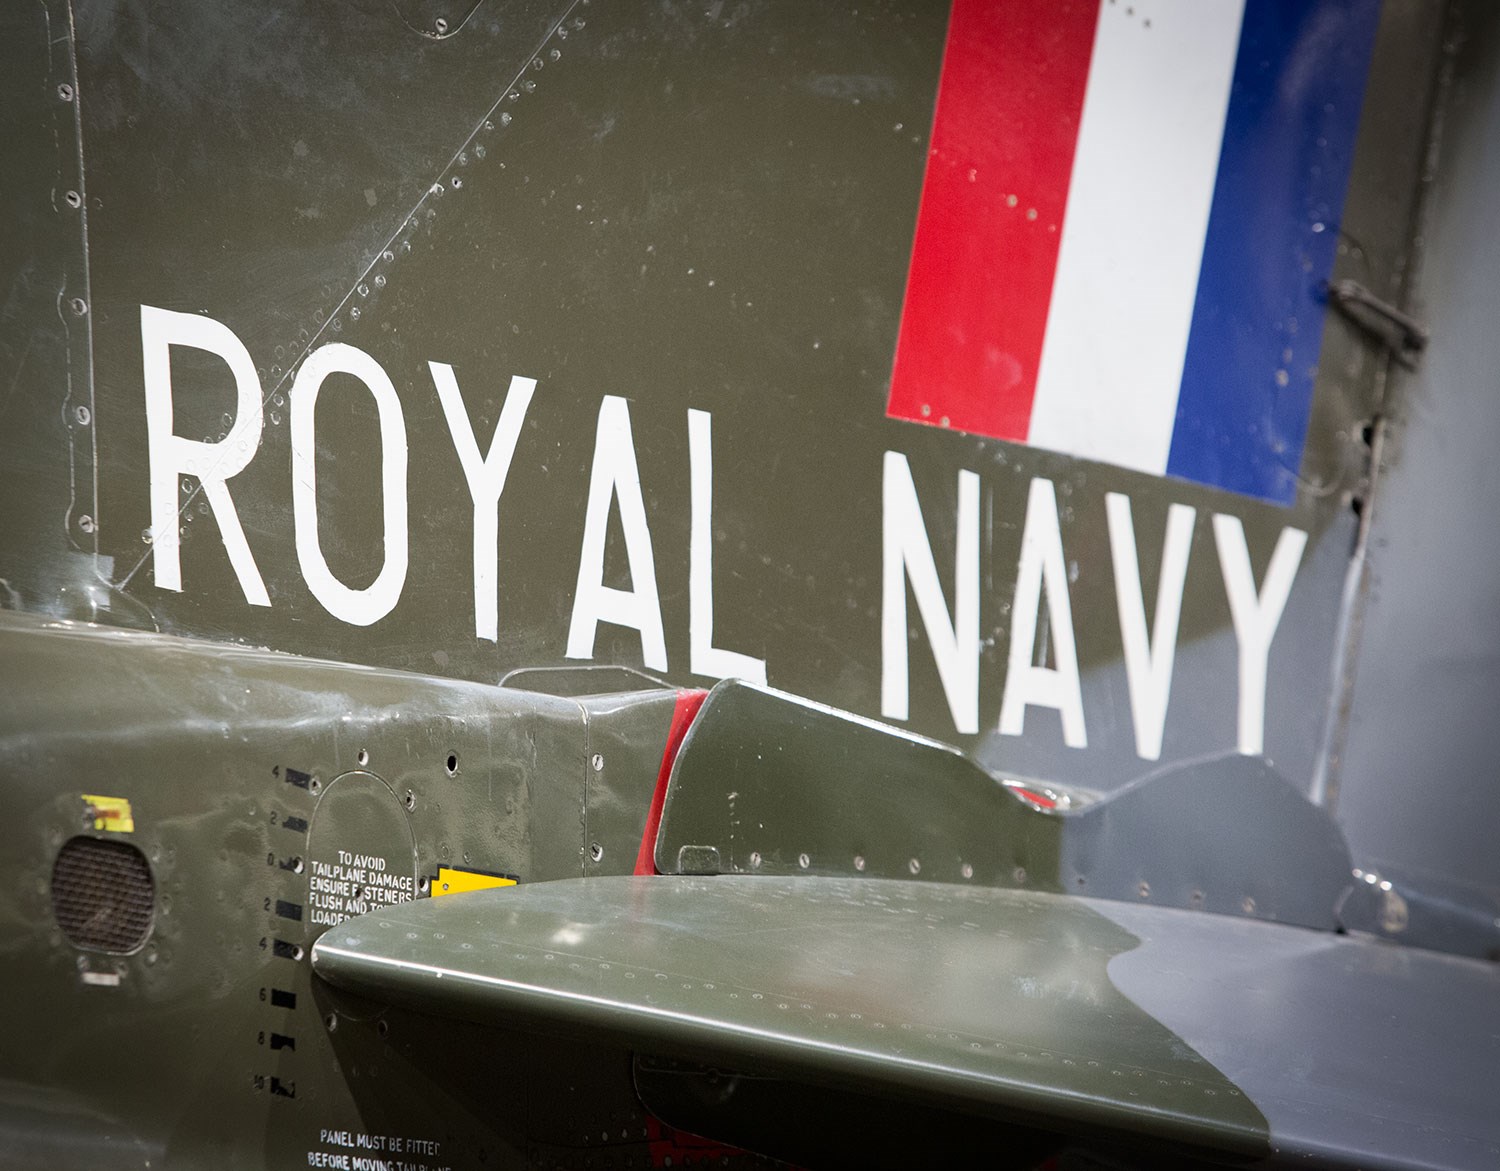 Royal Navy insignia on the side of a green Hawker Siddeley Harrier aircraft.